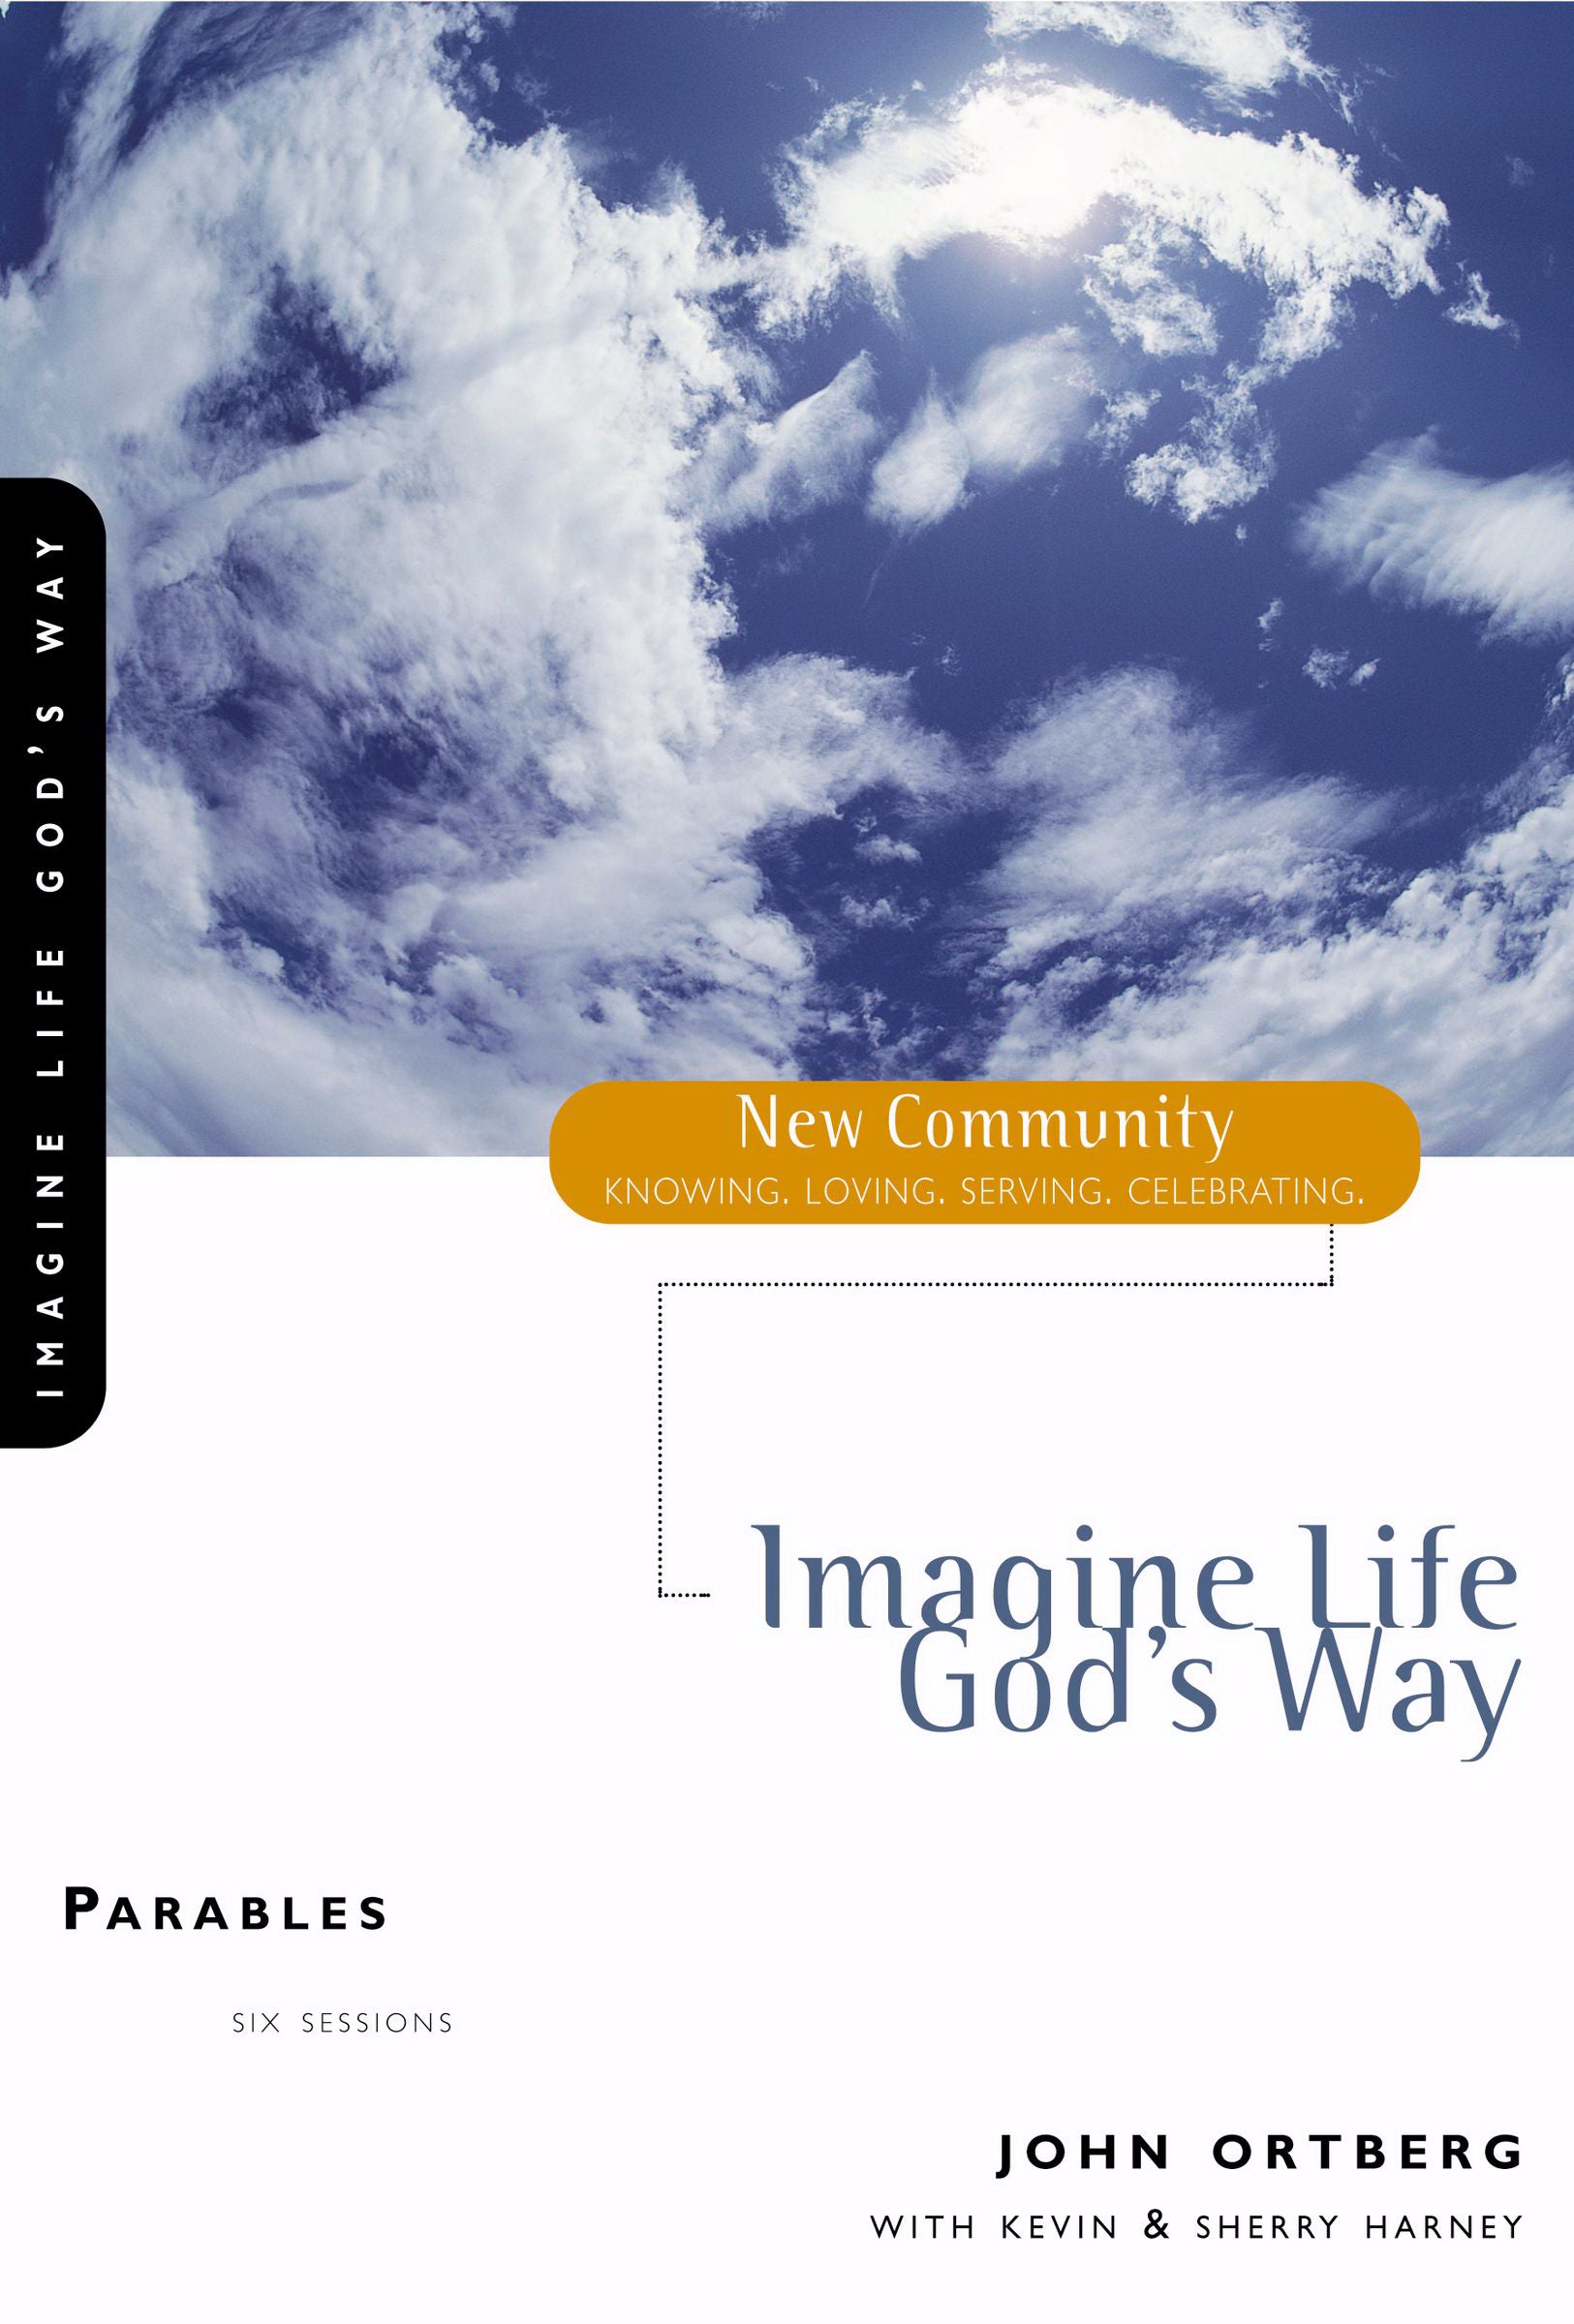 Image of Parables: Imagine Life God's Way other